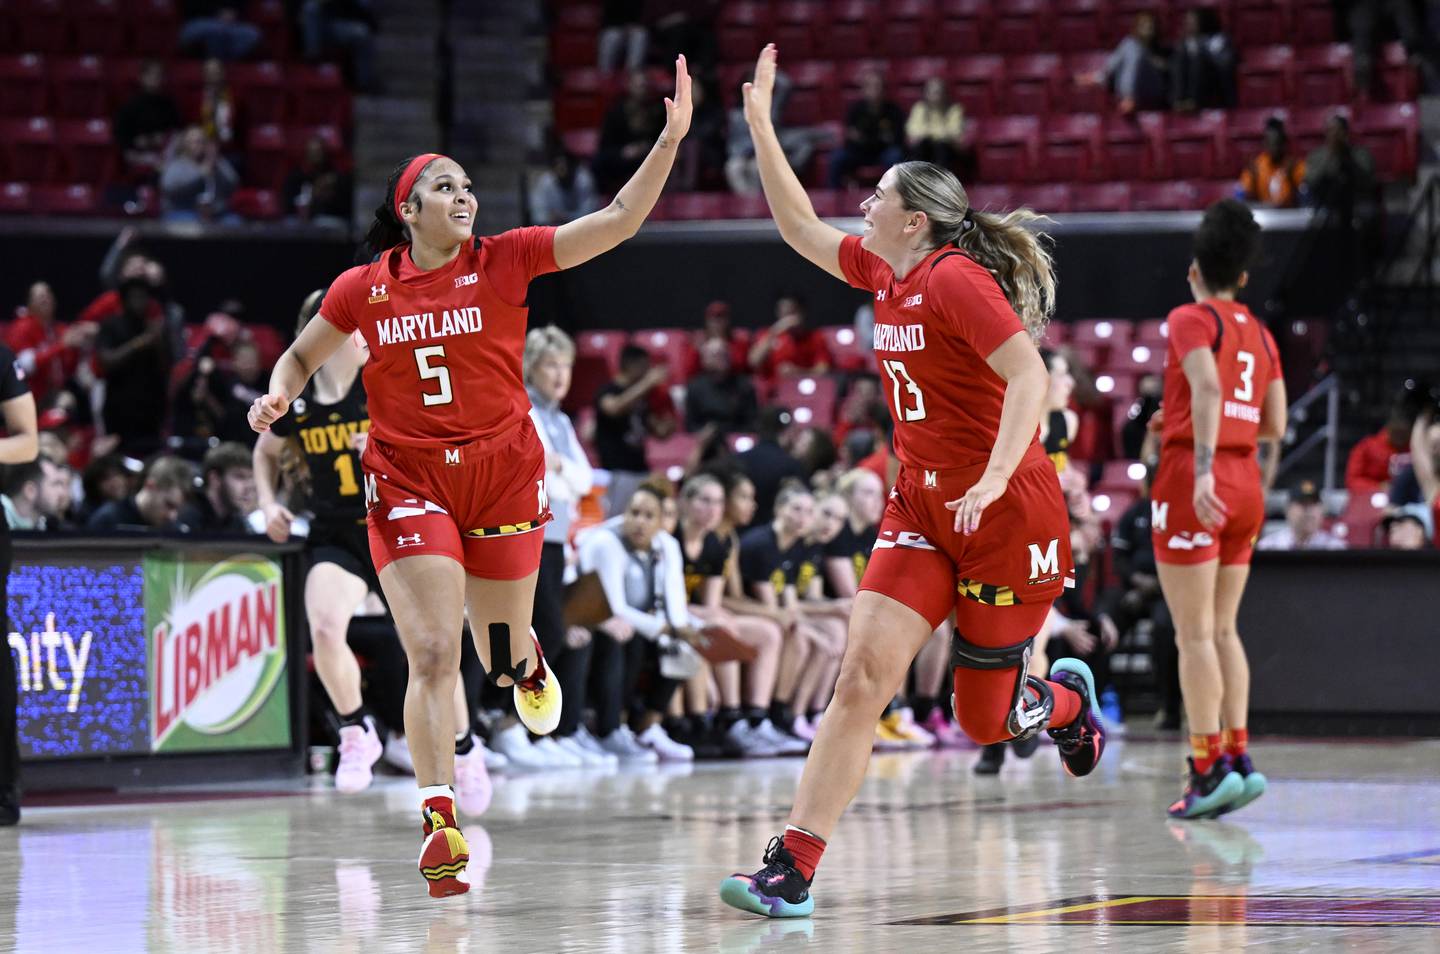 COLLEGE PARK, MARYLAND - FEBRUARY 21: Brinae Alexander #5 and Faith Masonius #13 of the Maryland Terrapins celebrate in the second quarter of the game against the Iowa Hawkeyes at Xfinity Center on February 21, 2023 in College Park, Maryland.